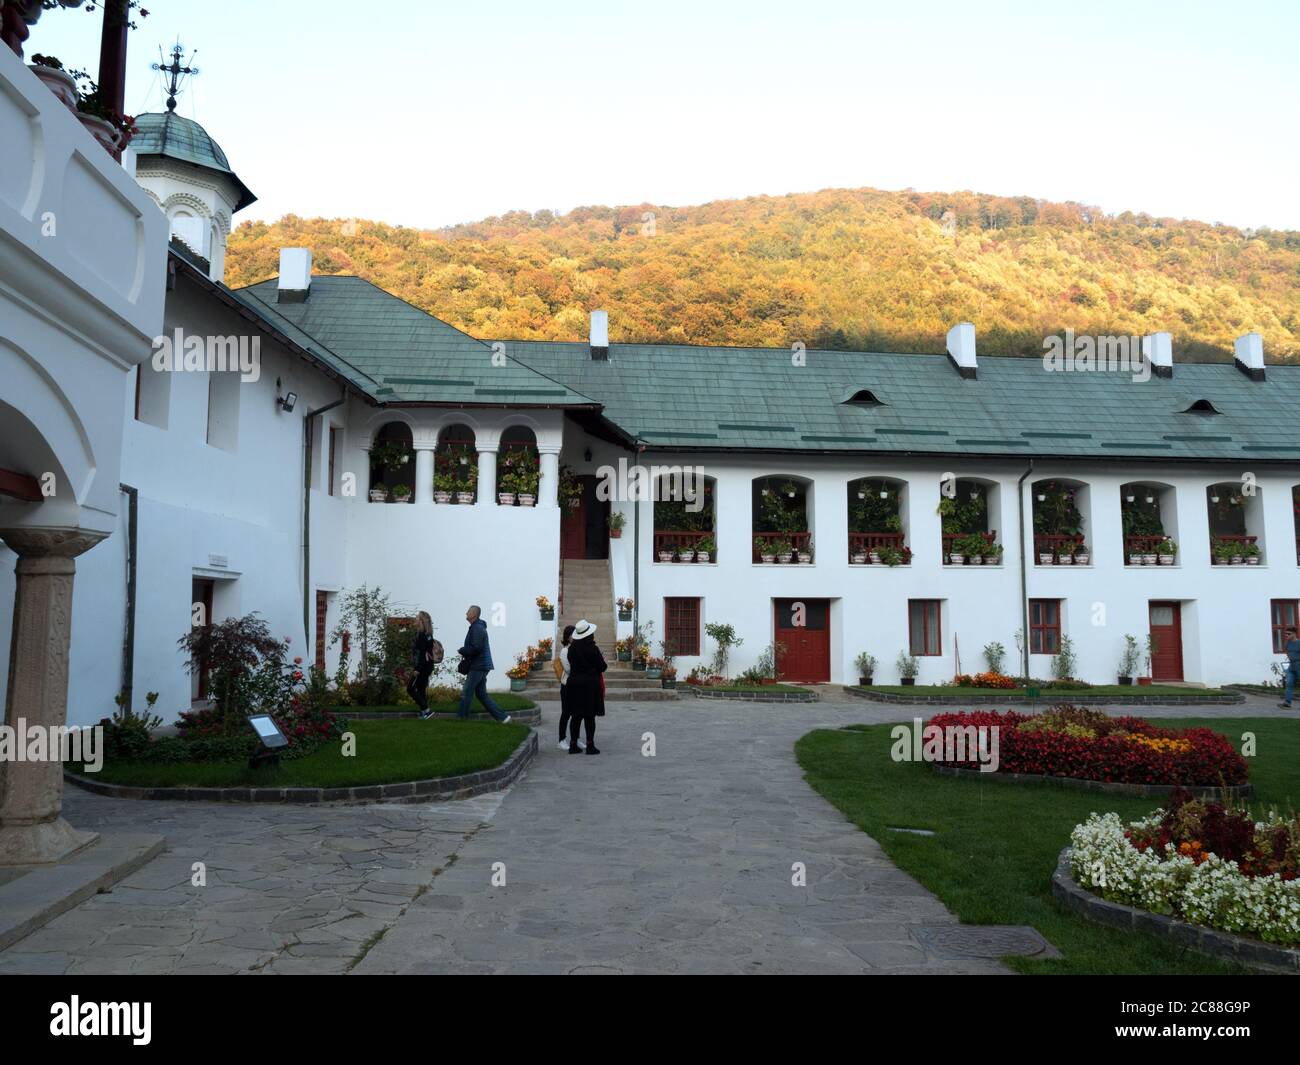 Tranquil atmosphere at Cozia Monastery, the 14th century architecture. The medieval architecture in Romania Stock Photo